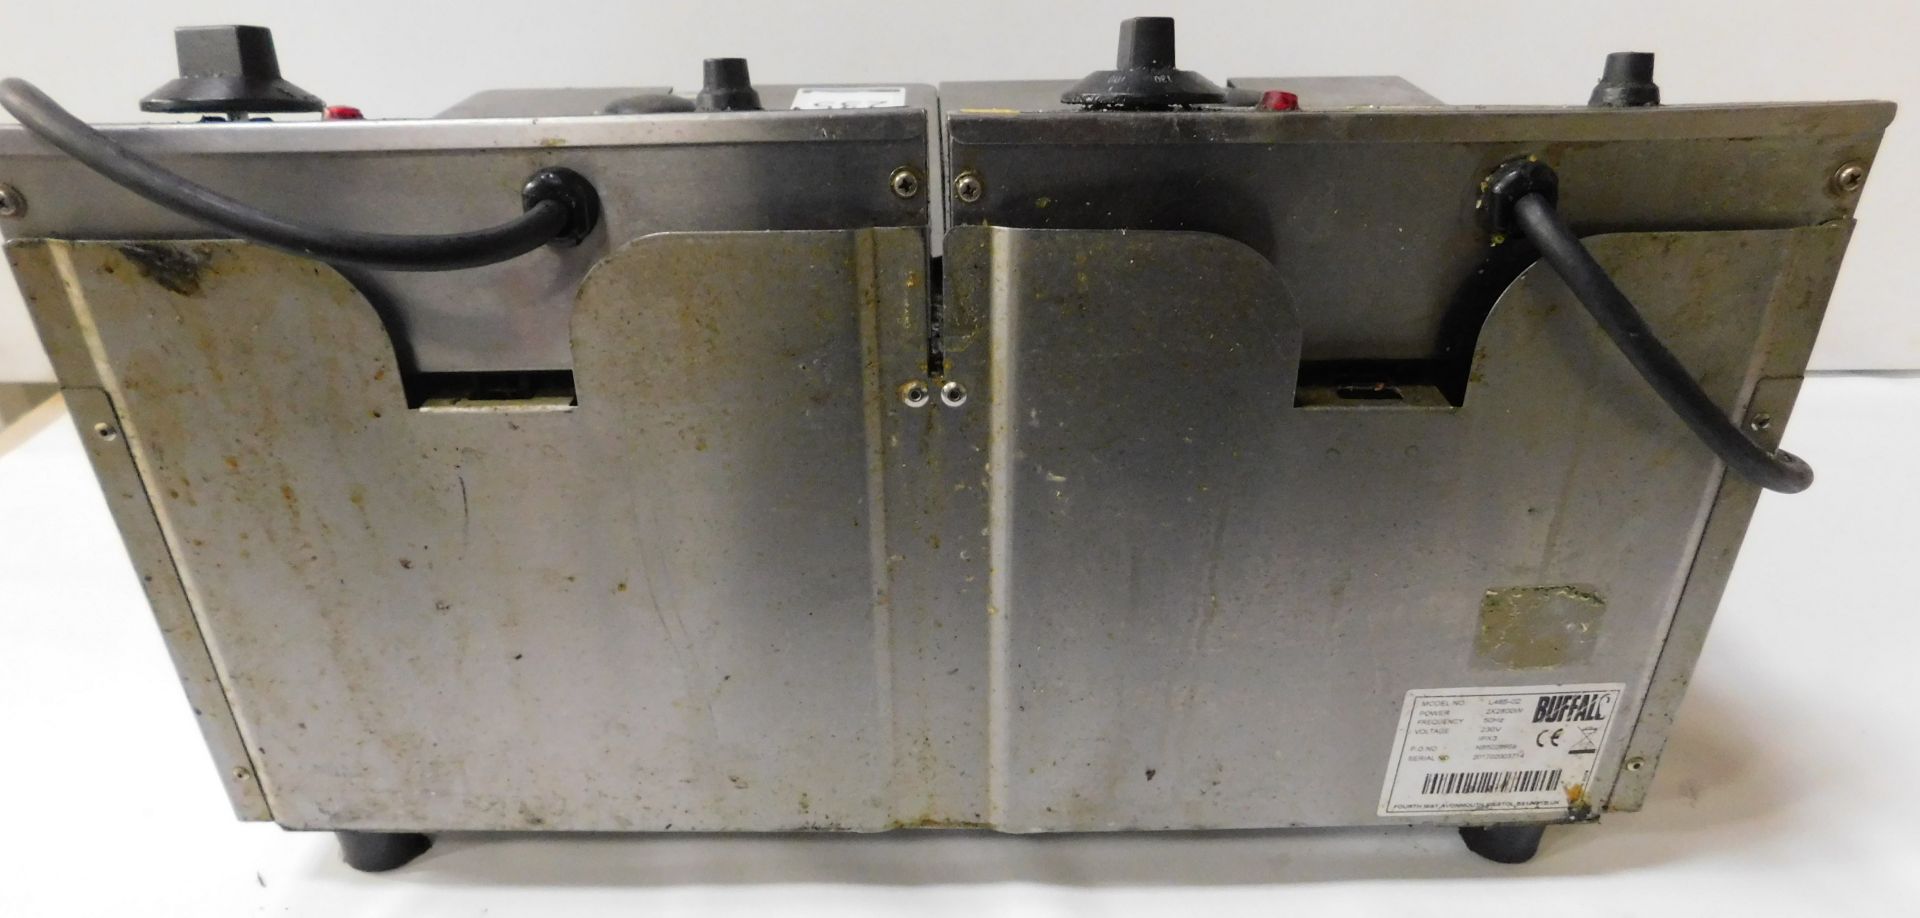 Buffalo Double Deep Fryer (Location Brentwood. Please Refer to General Notes) - Image 3 of 4